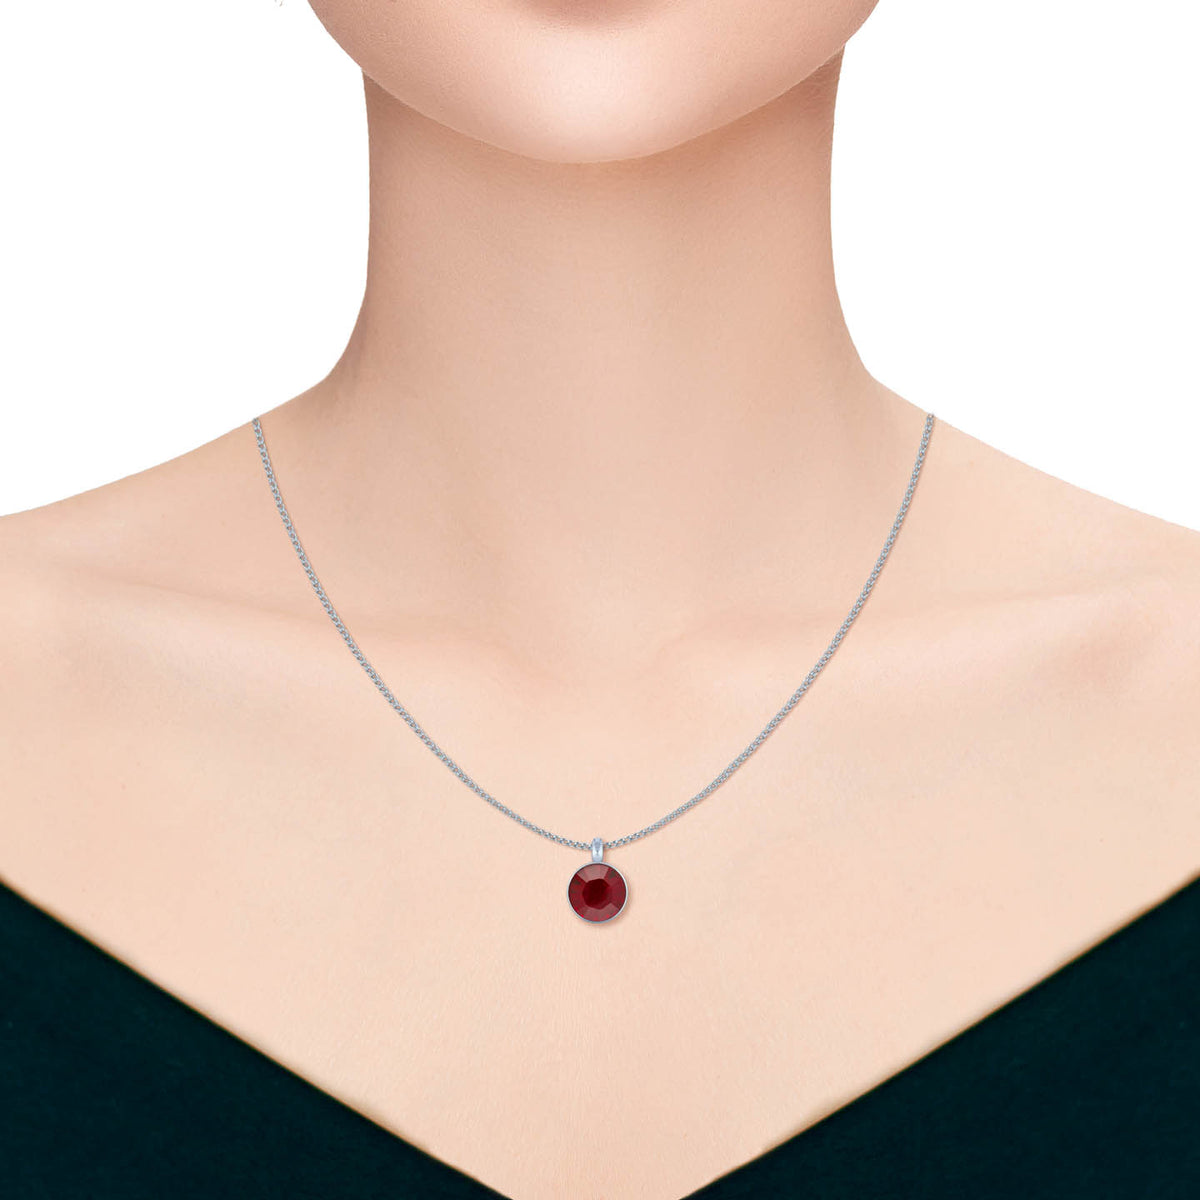 Bella Pendant Necklace with Red Siam Round Crystals from Swarovski Silver Toned Rhodium Plated - Ed Heart